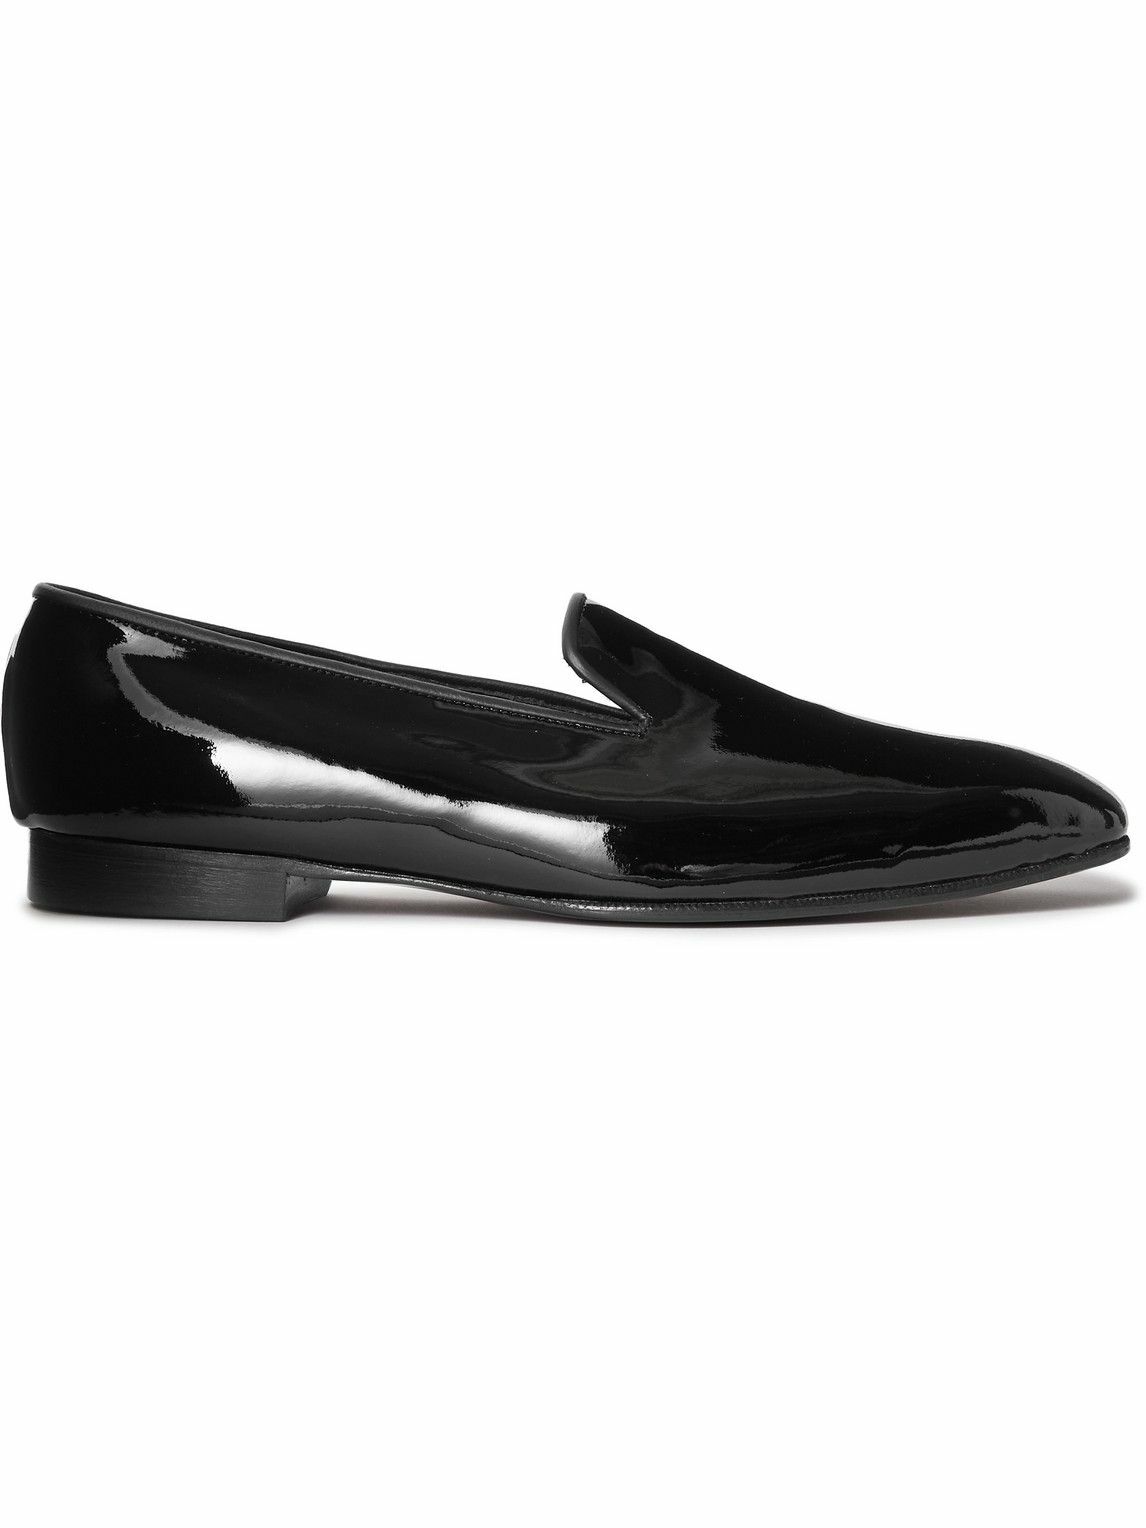 George Cleverley - Windsor Patent-Leather Loafers - Black George Cleverley